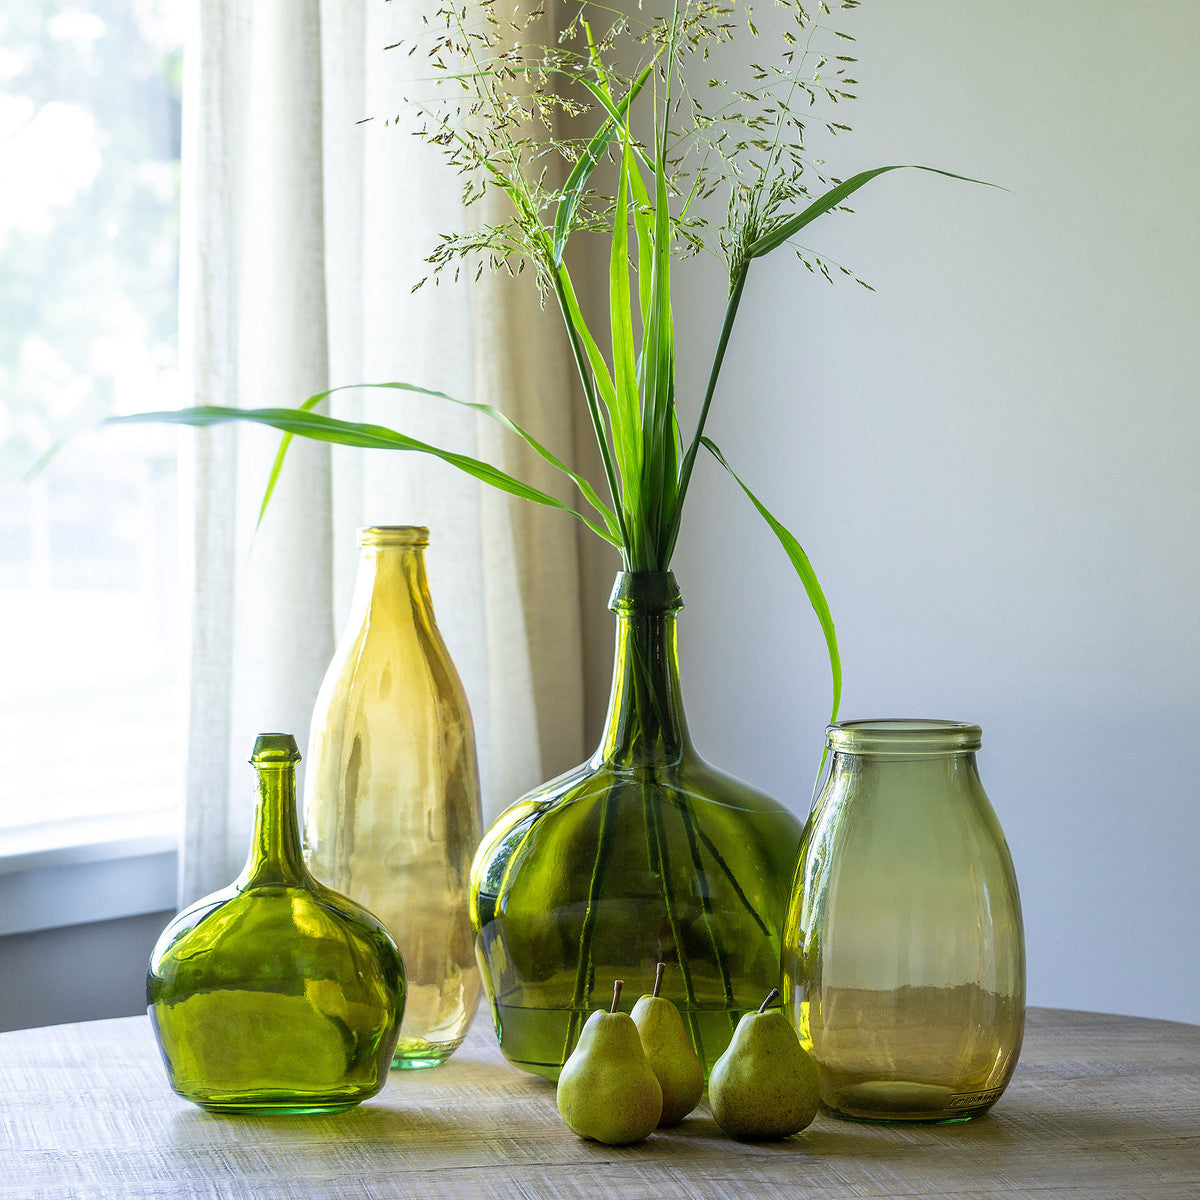 green vase and gold vase collection with pears and grass